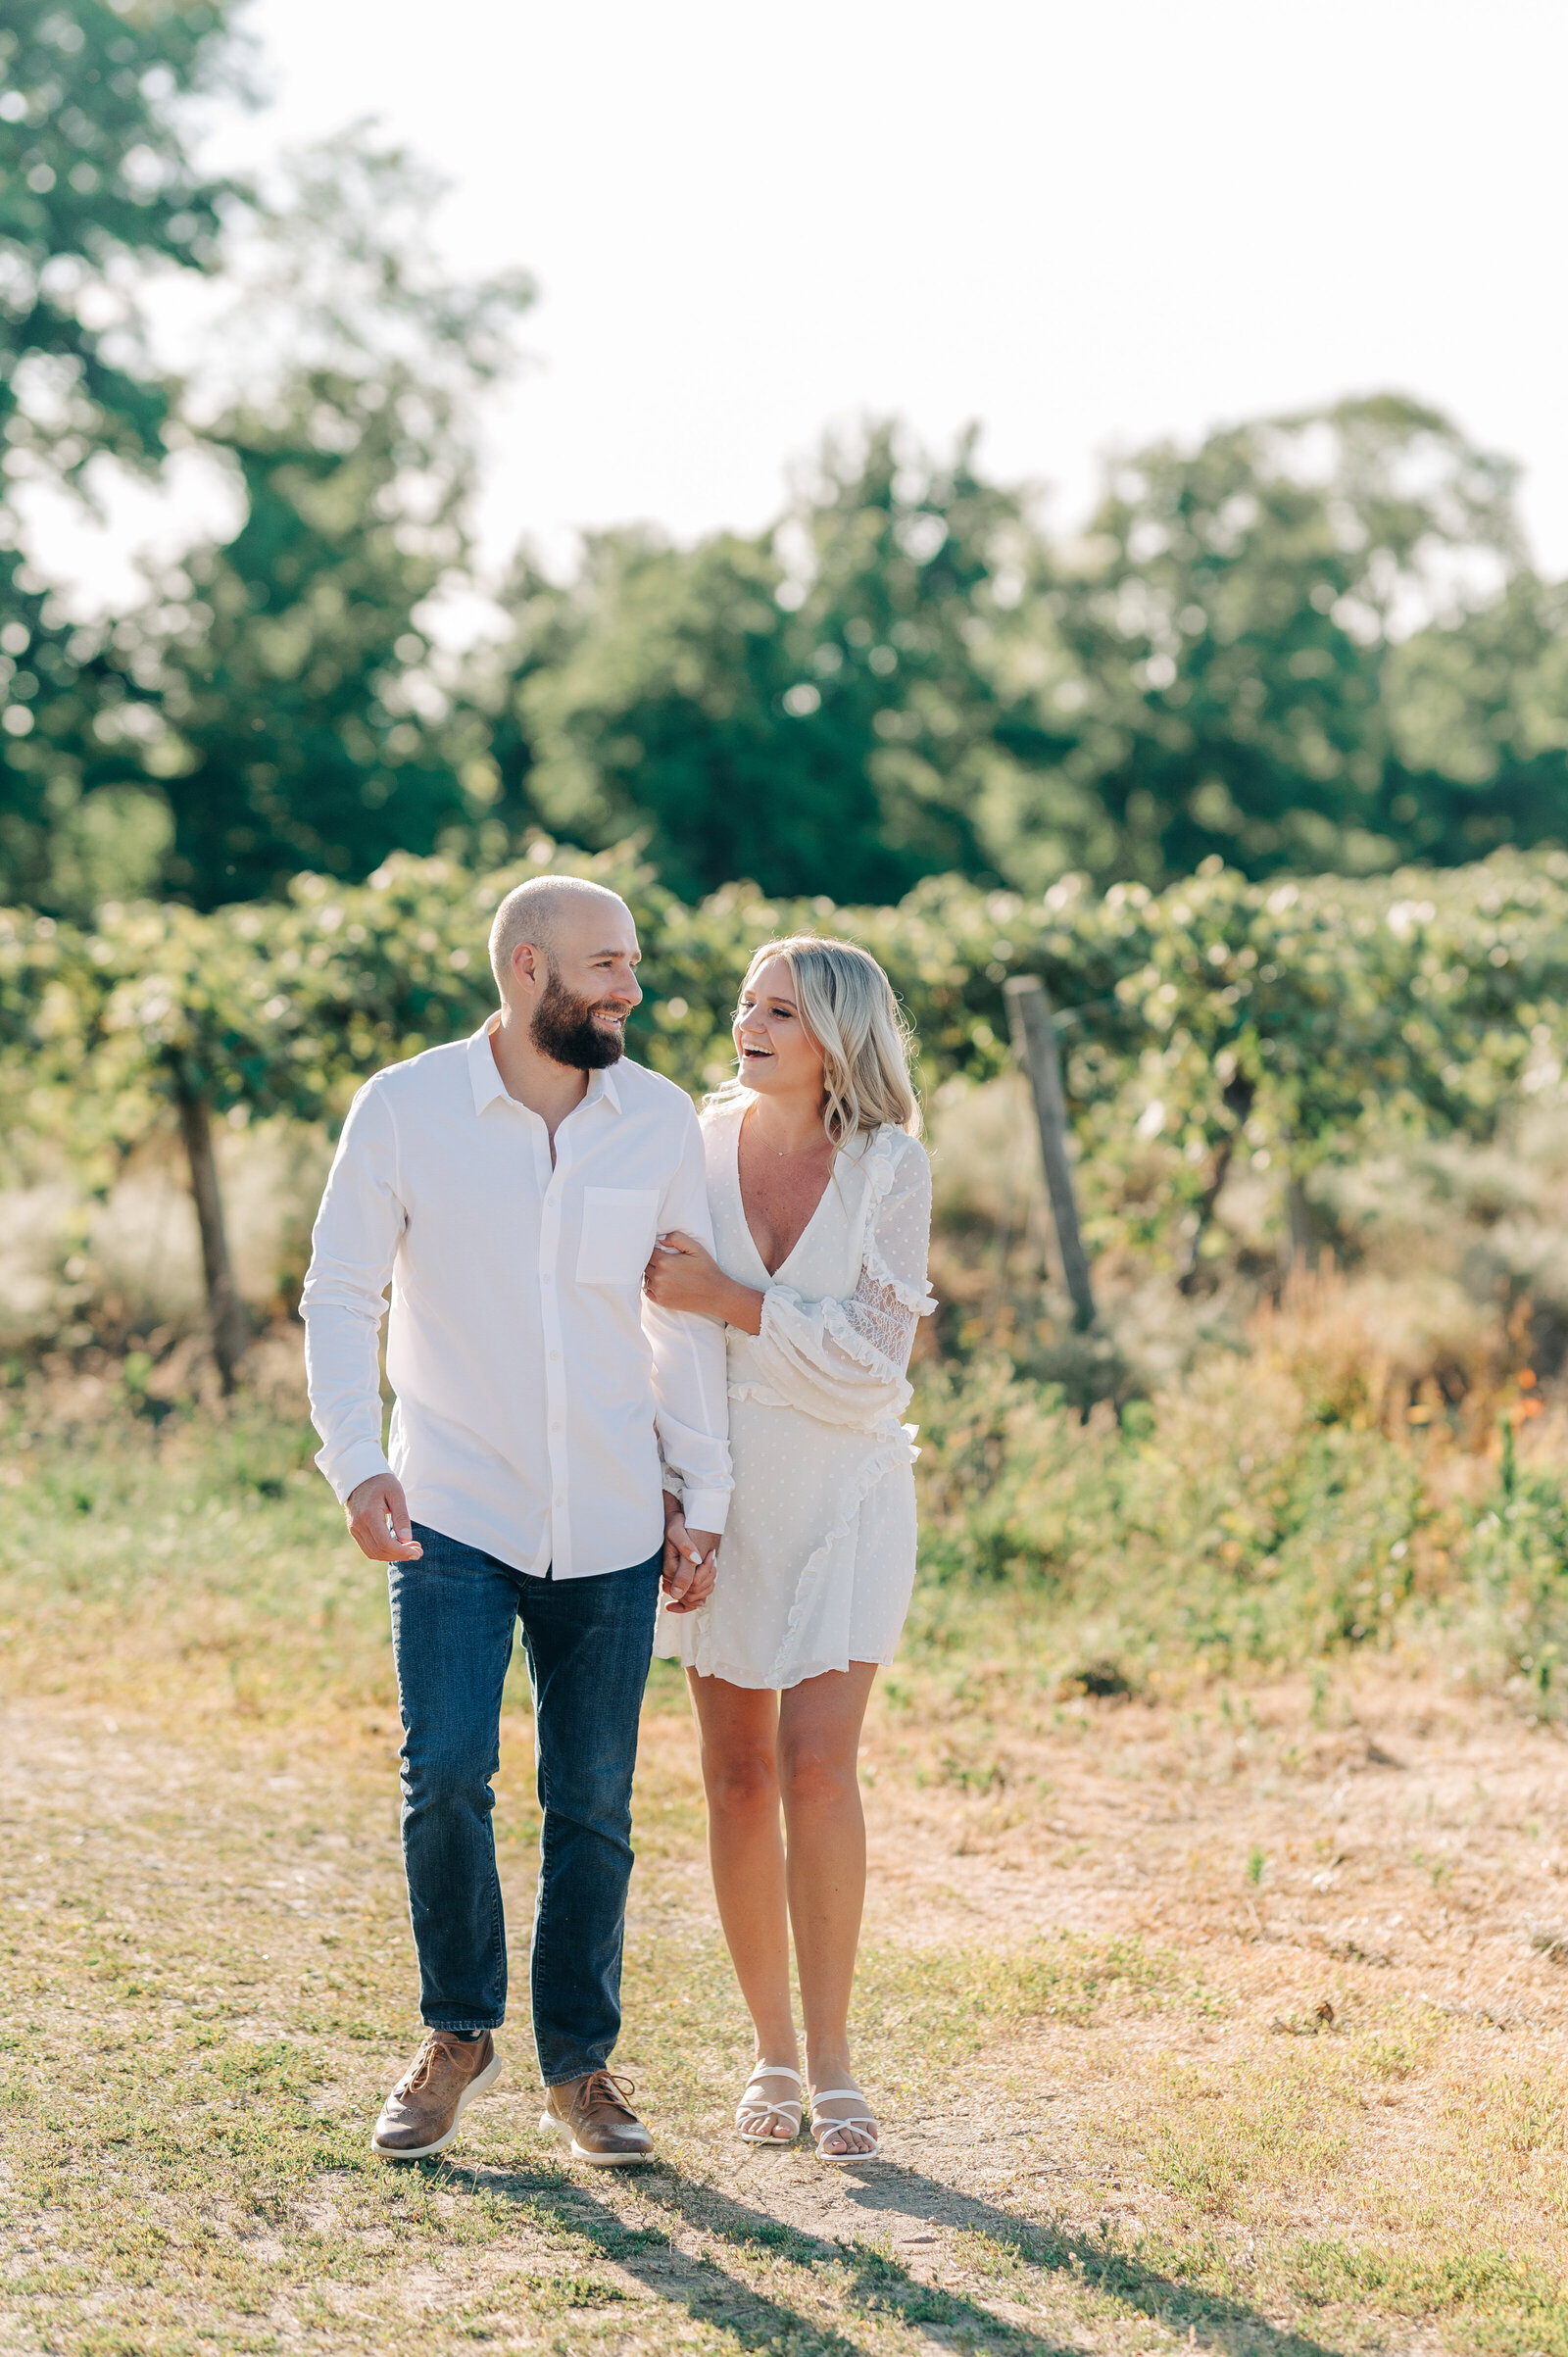 Quincy Cellars Summer Vineyard Engagement Session